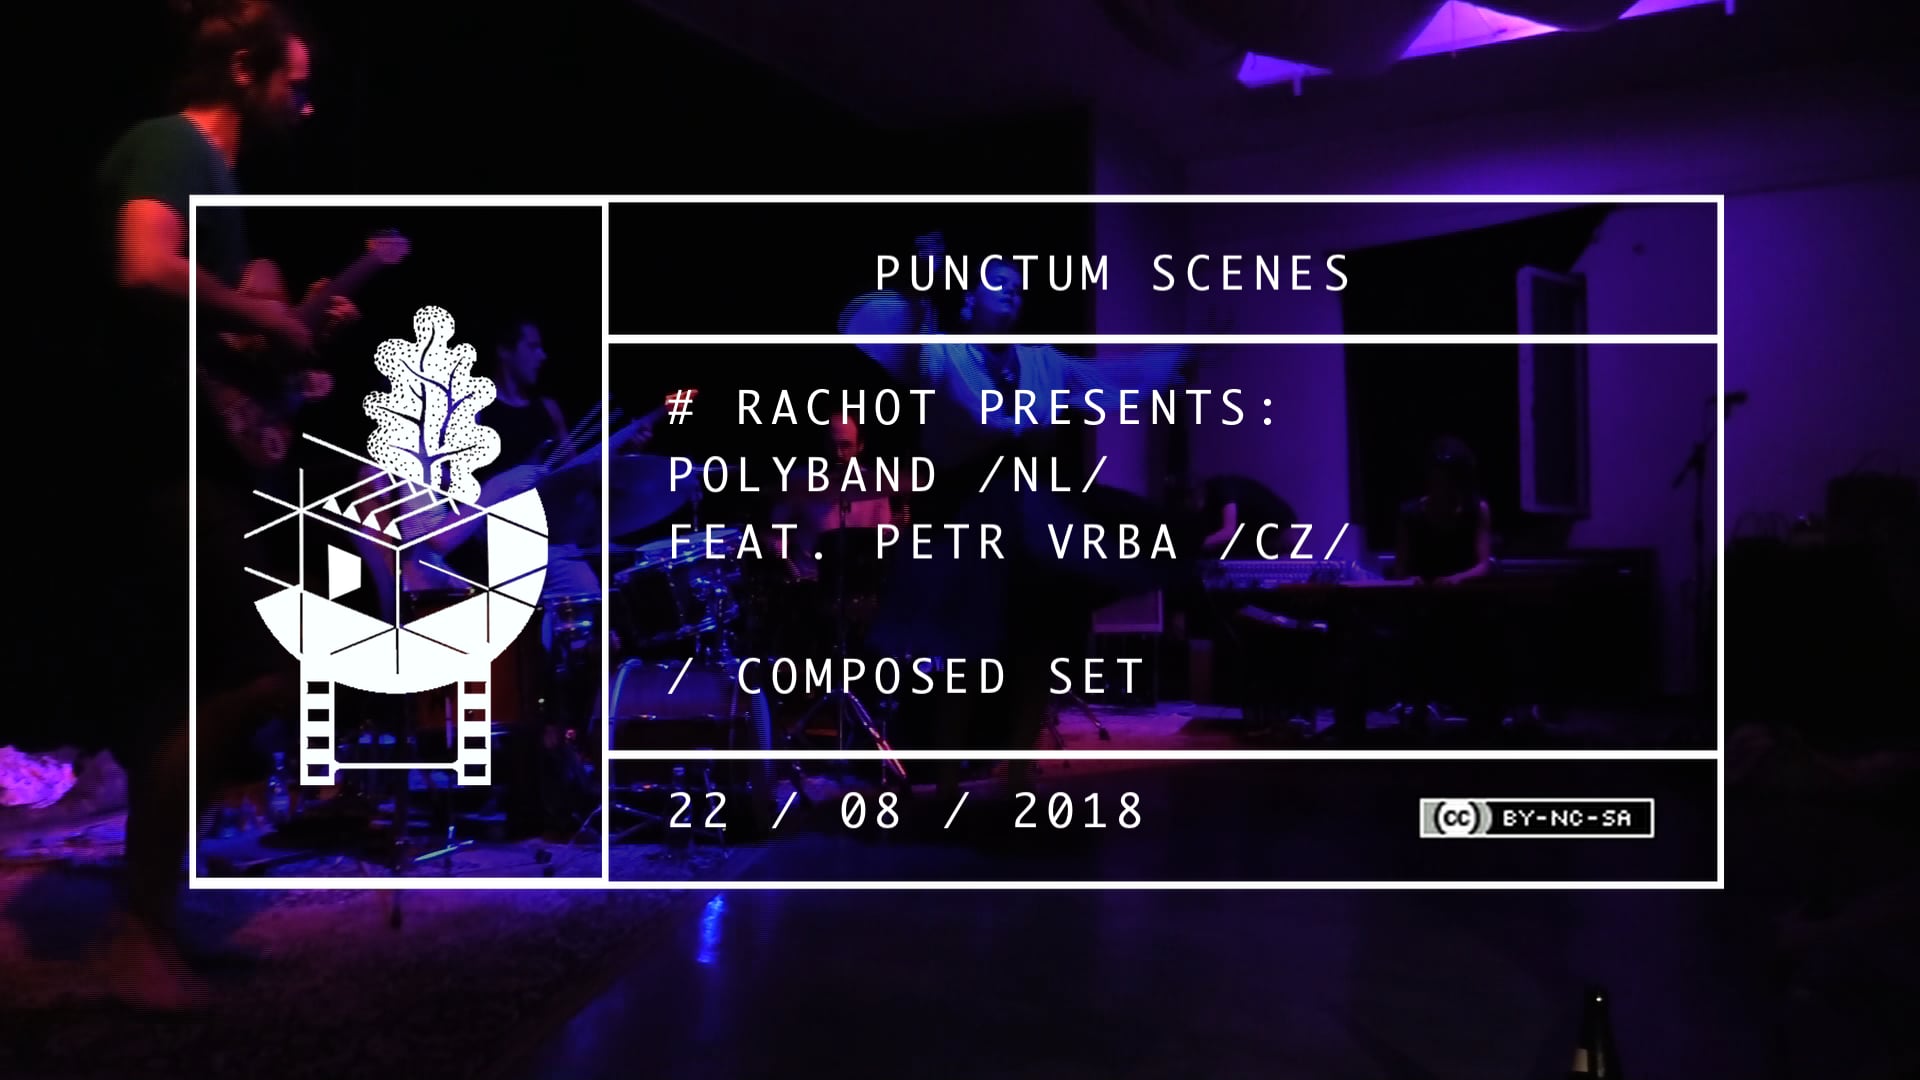 POLYBAND feat. PETR VRBA live at Punctum pt. 2